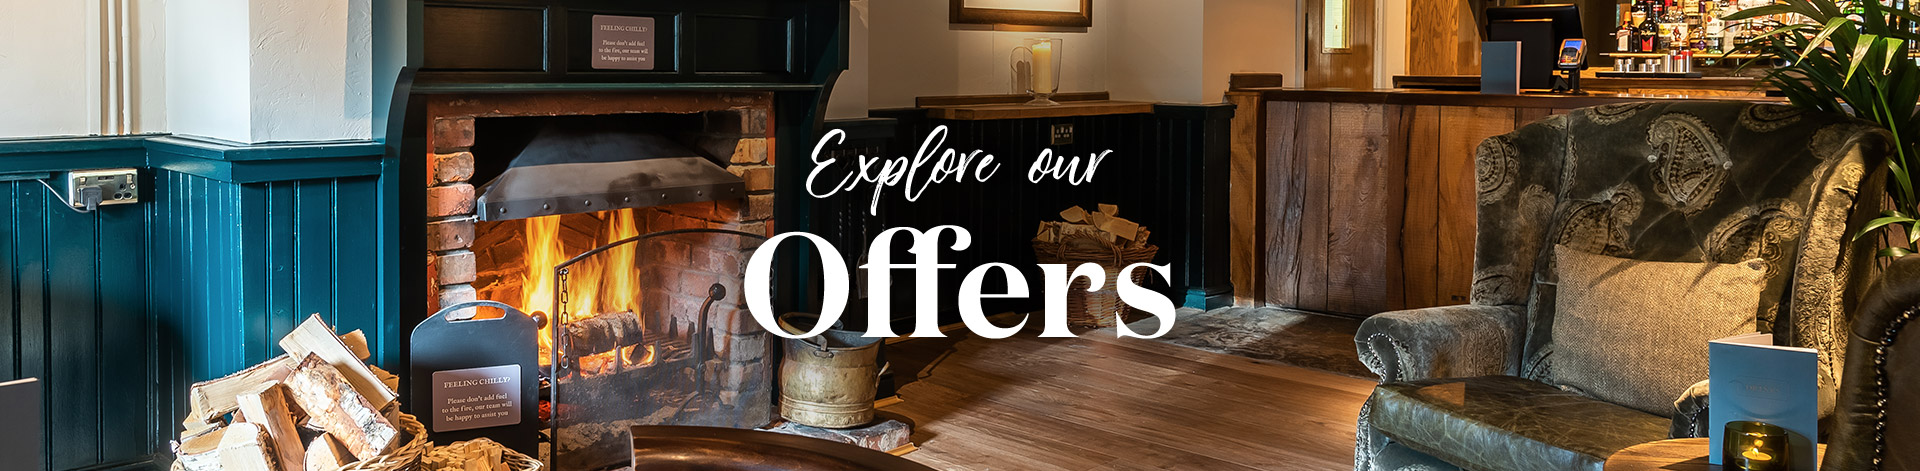 Our latest offers at The Lion